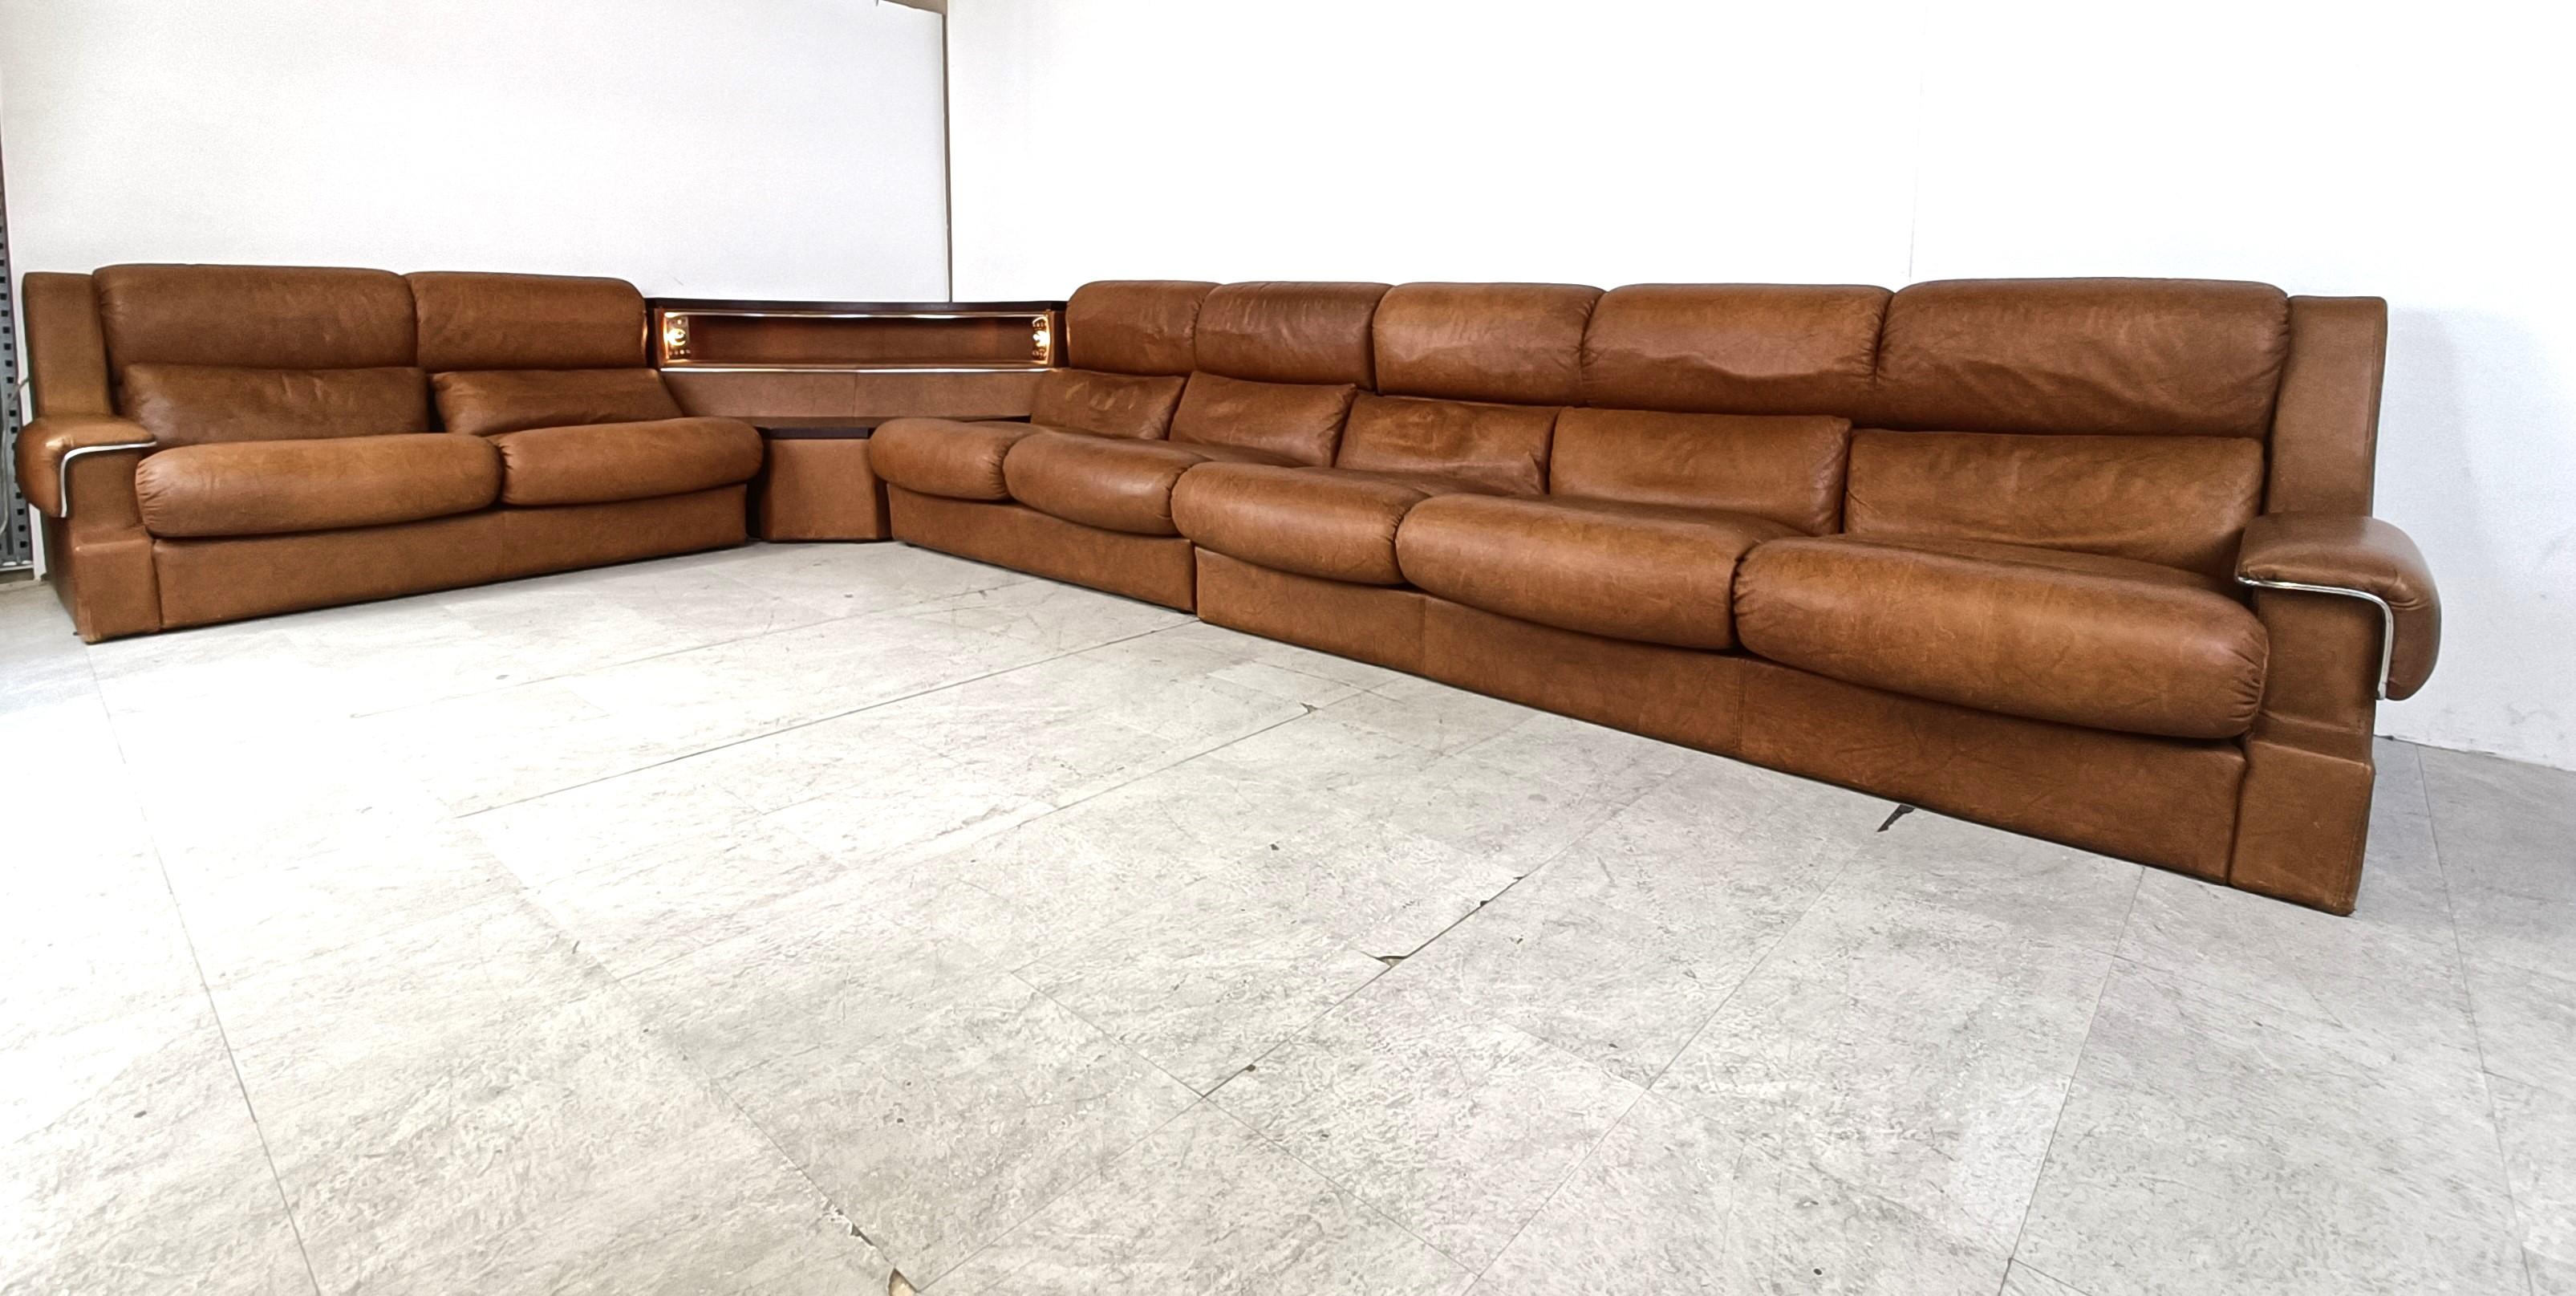 Seventies design sofa set made from simili leather with a illuminated storage space.

Cool chromed tubular details.

Very comfortable sofa set with a cool seventies vibe.

Very good condition

1970s - België

Dimensions (L shaped as